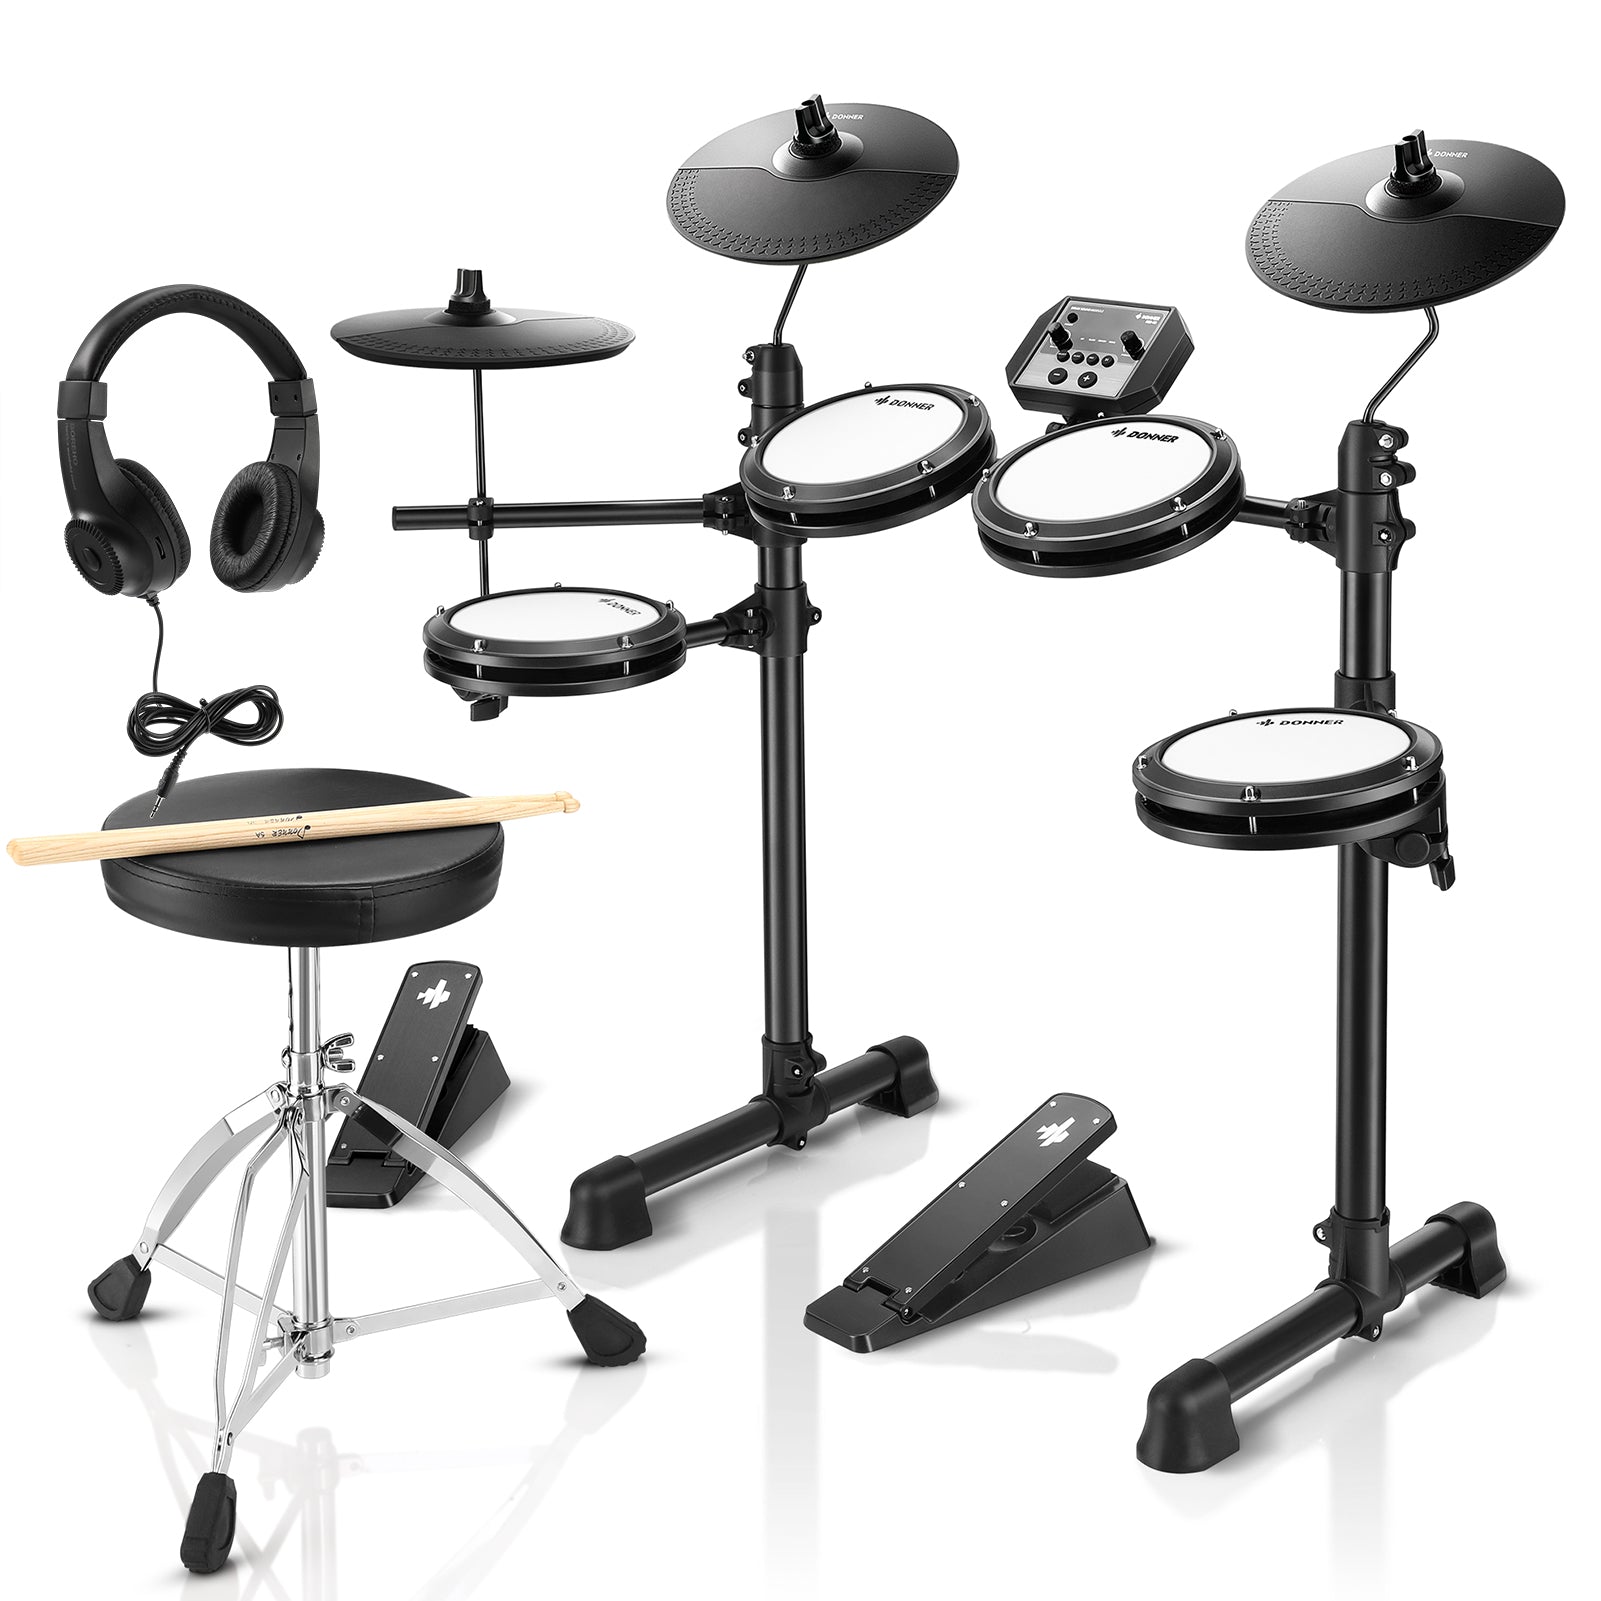 

Donner DED-80 Best Electronic Drum Kit For Beginners with Headphones/Drum Throne